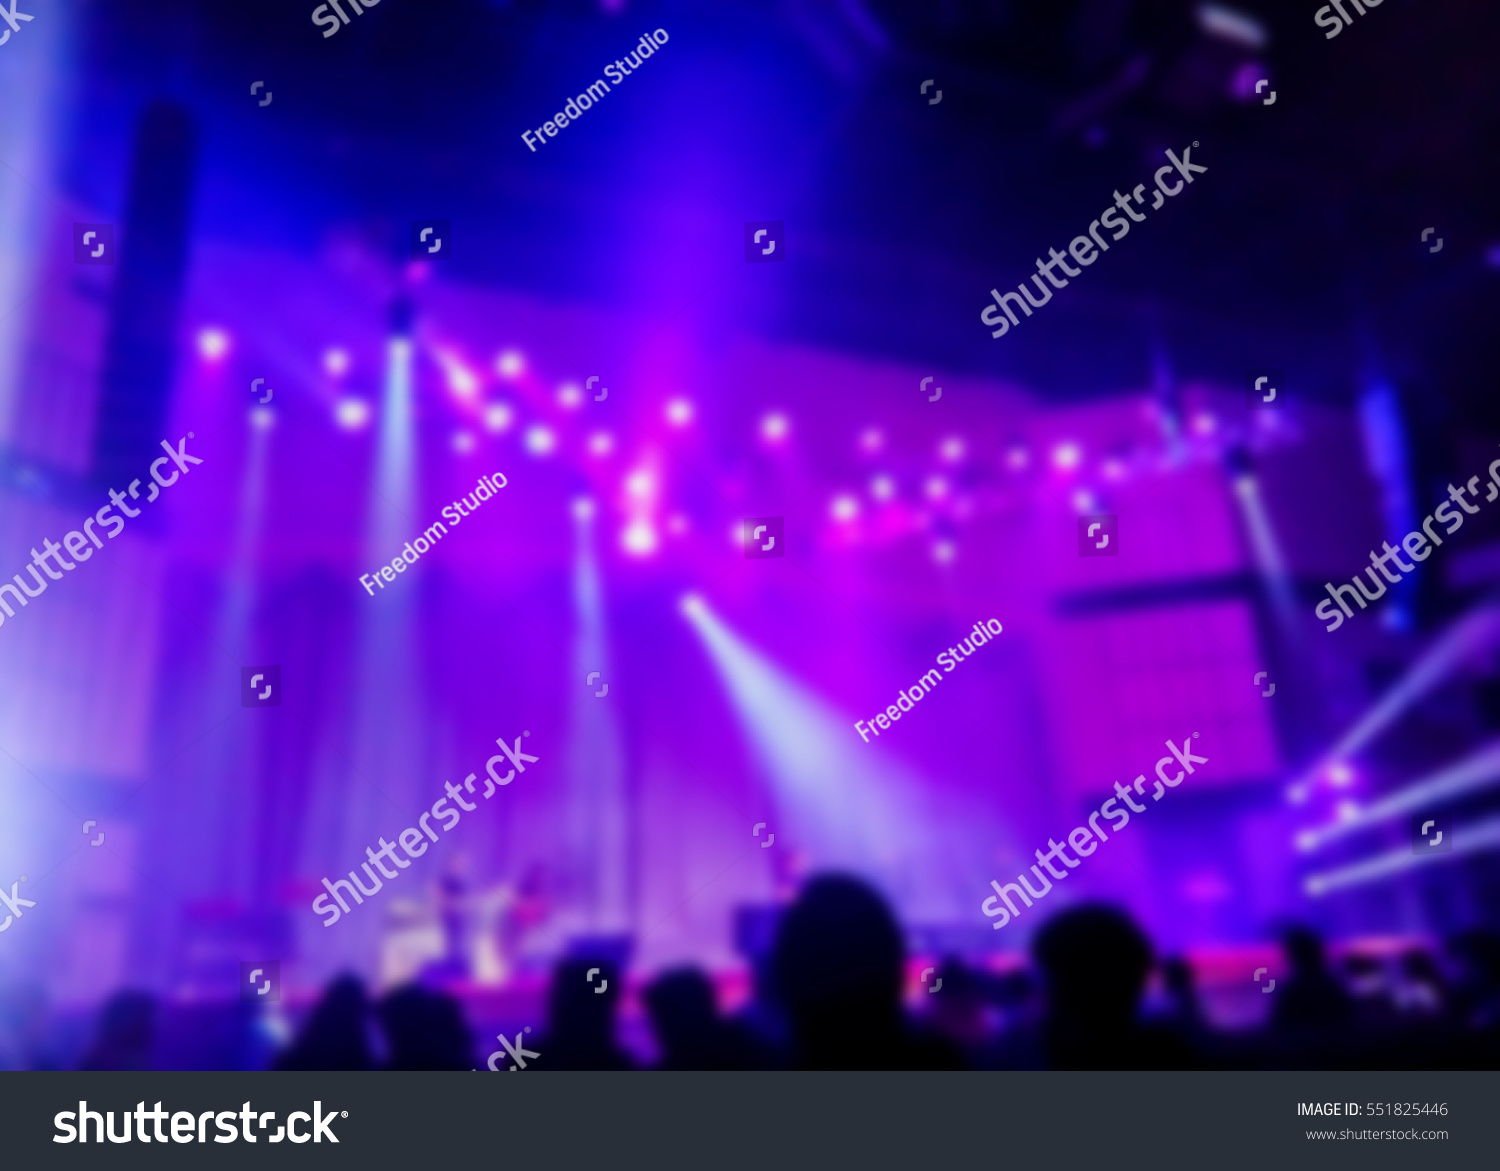 burred image of music concert stage with nice color light, can be used  for decoration or background #551825446